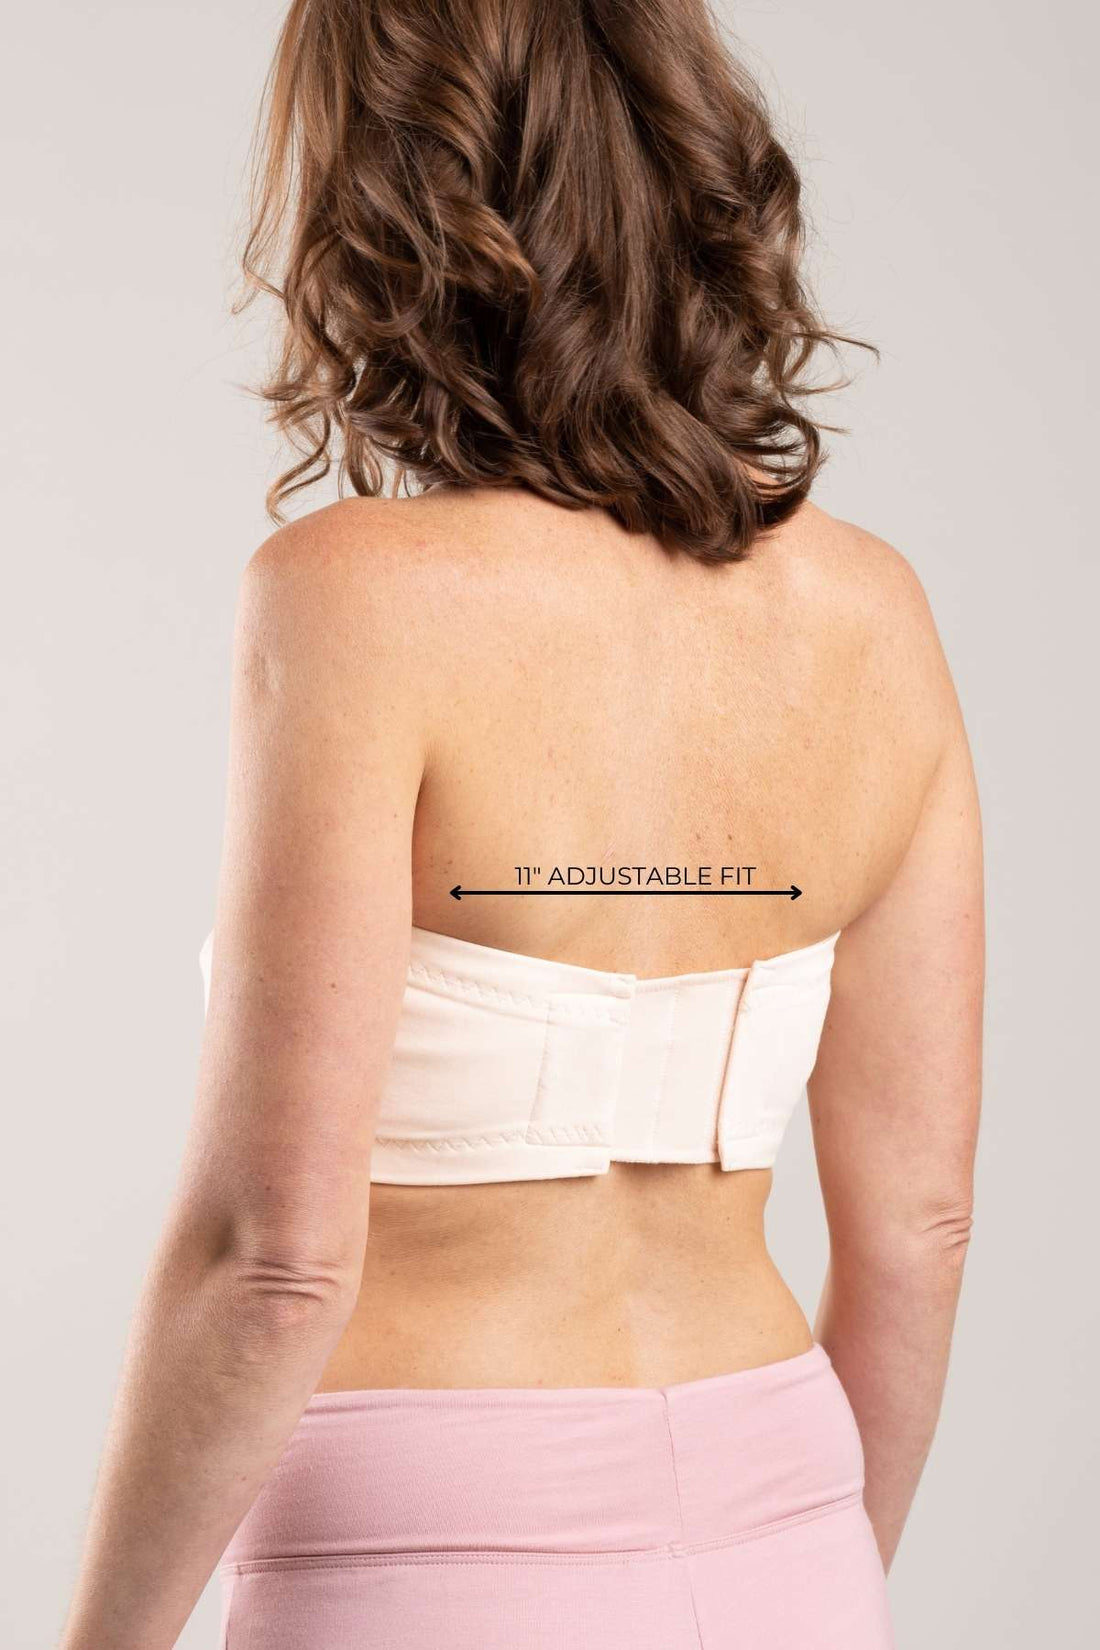 Simple Wishes Adjustable Hands Free Pumping Bra  - Soft Pink